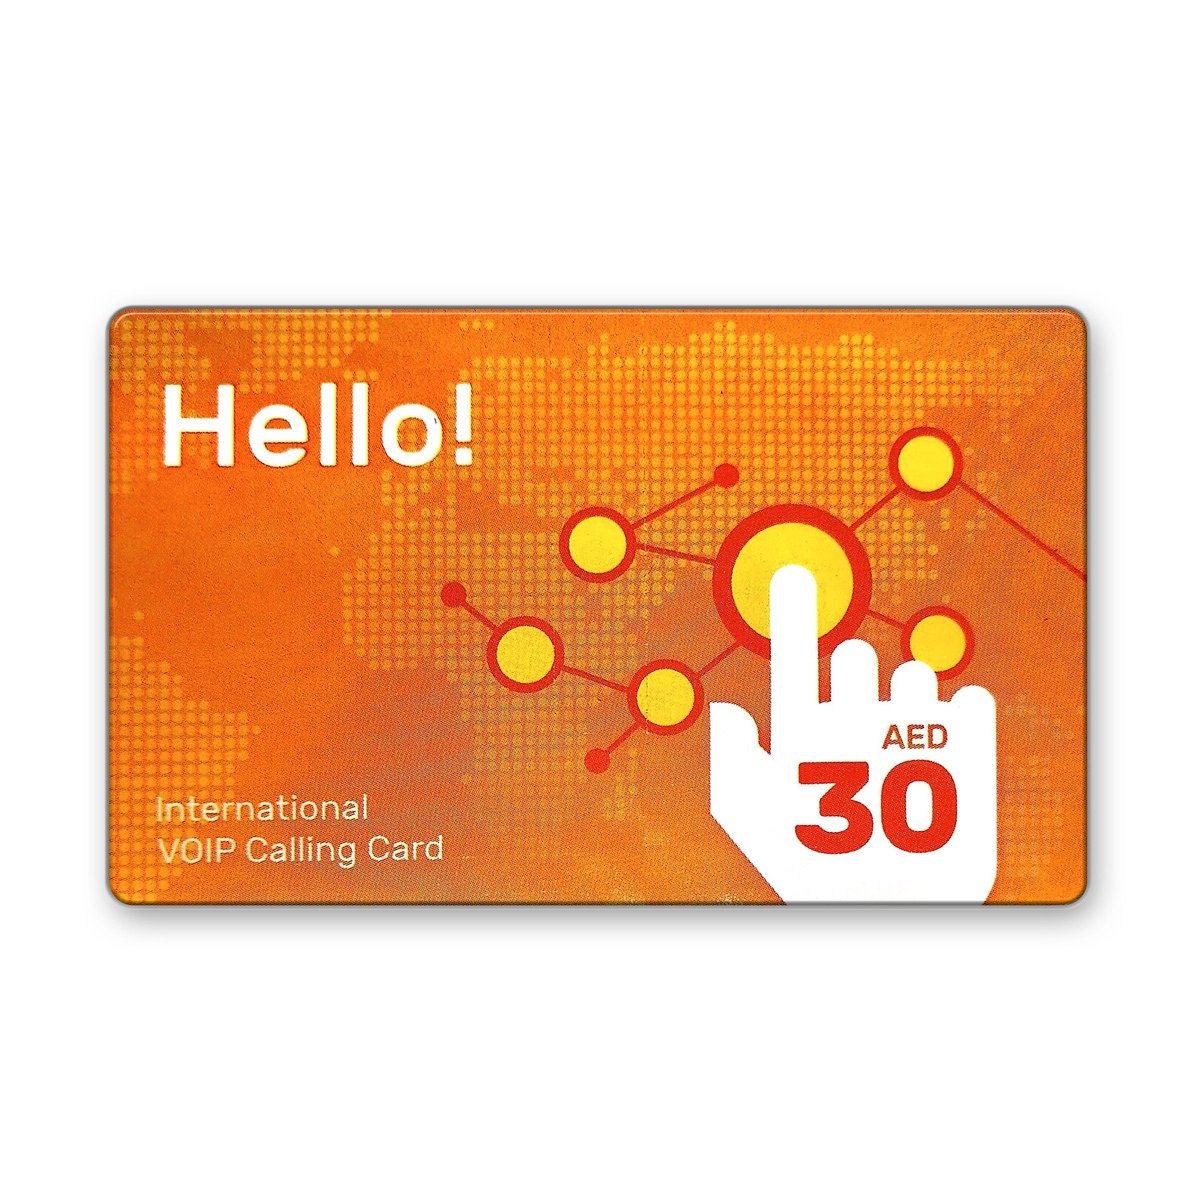 Hello VOIP Card (AED 30)